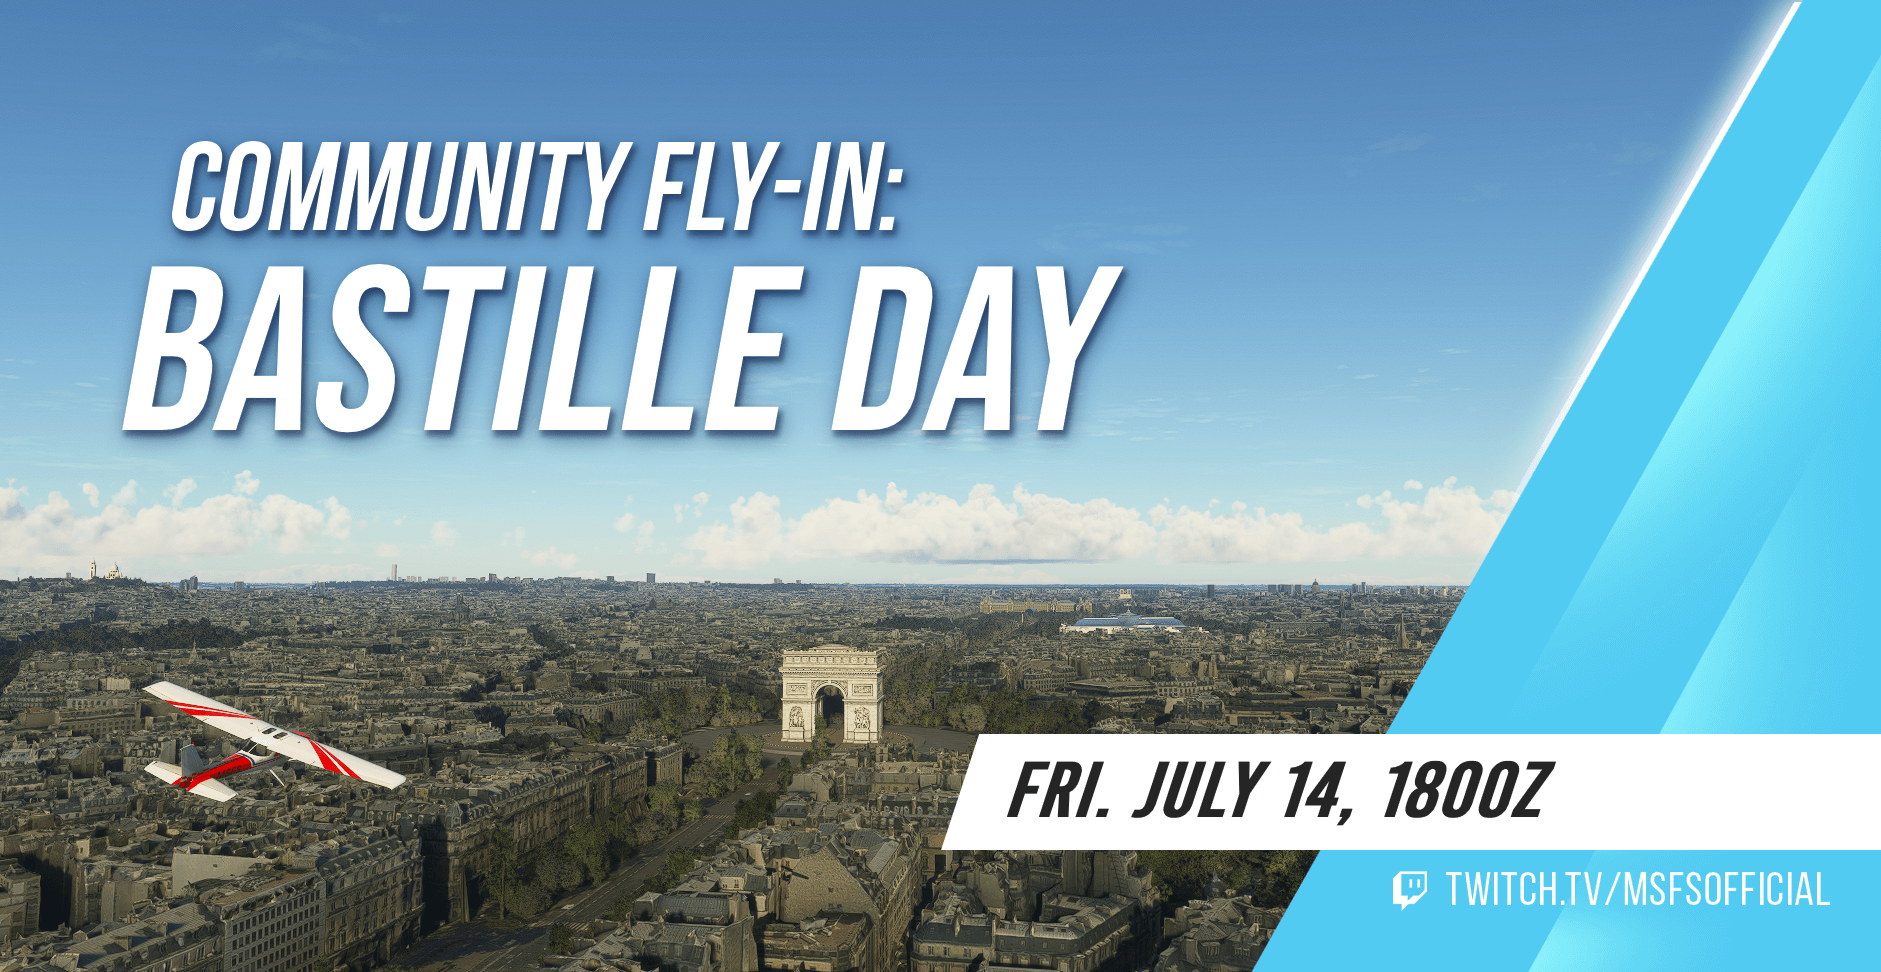 Join us on Friday July 14th at 1800Z for our Community Fly-In: Bastille Day! You can watch at twitch.tv/msfsofficial